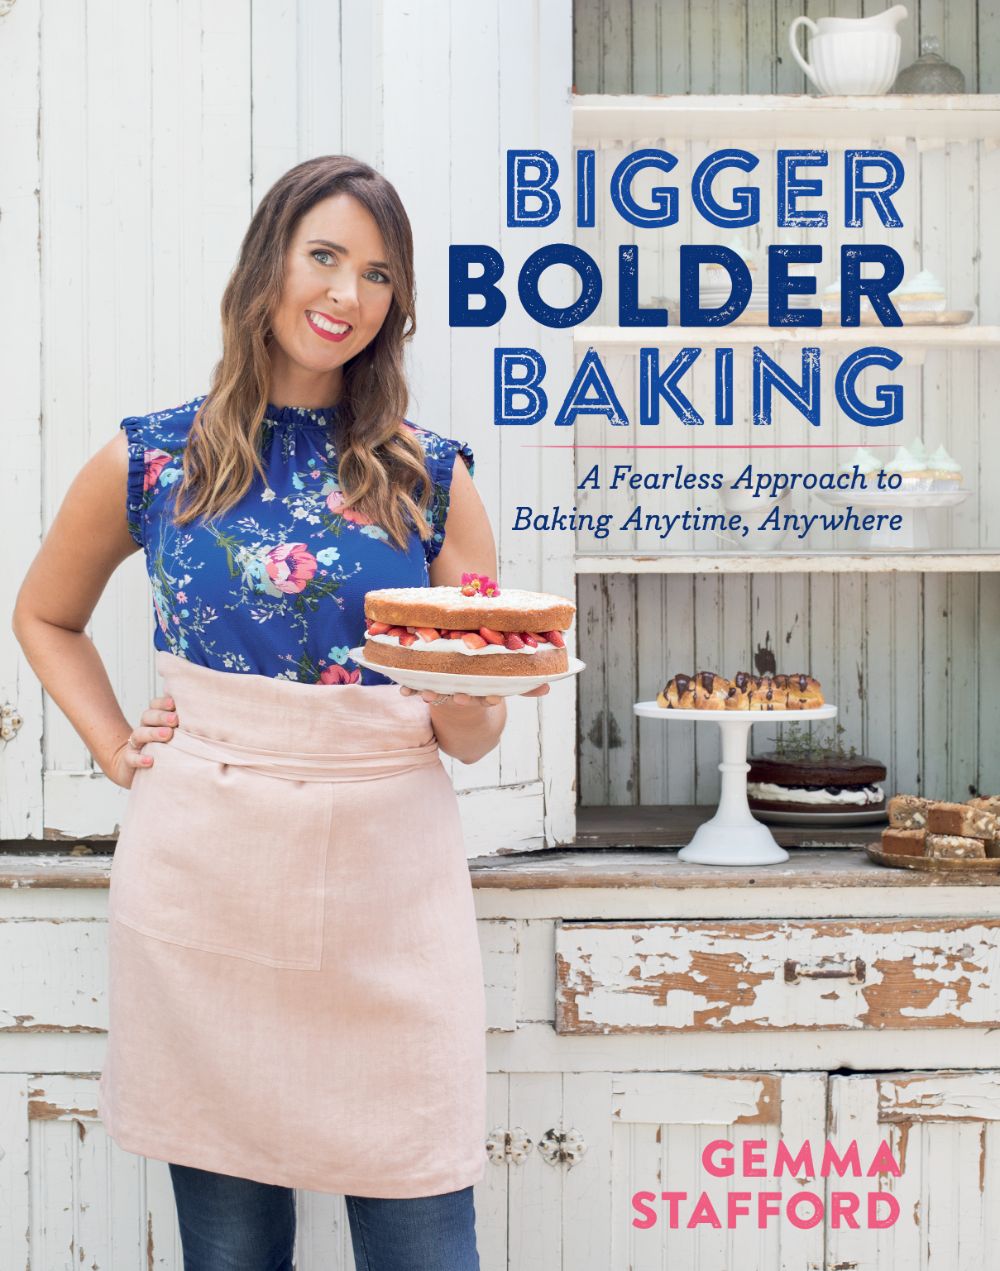 Pre-Order the first Bigger Bolder Baking cookbook featuring 100+ dessert recipes you can bake anytime, anywhere.